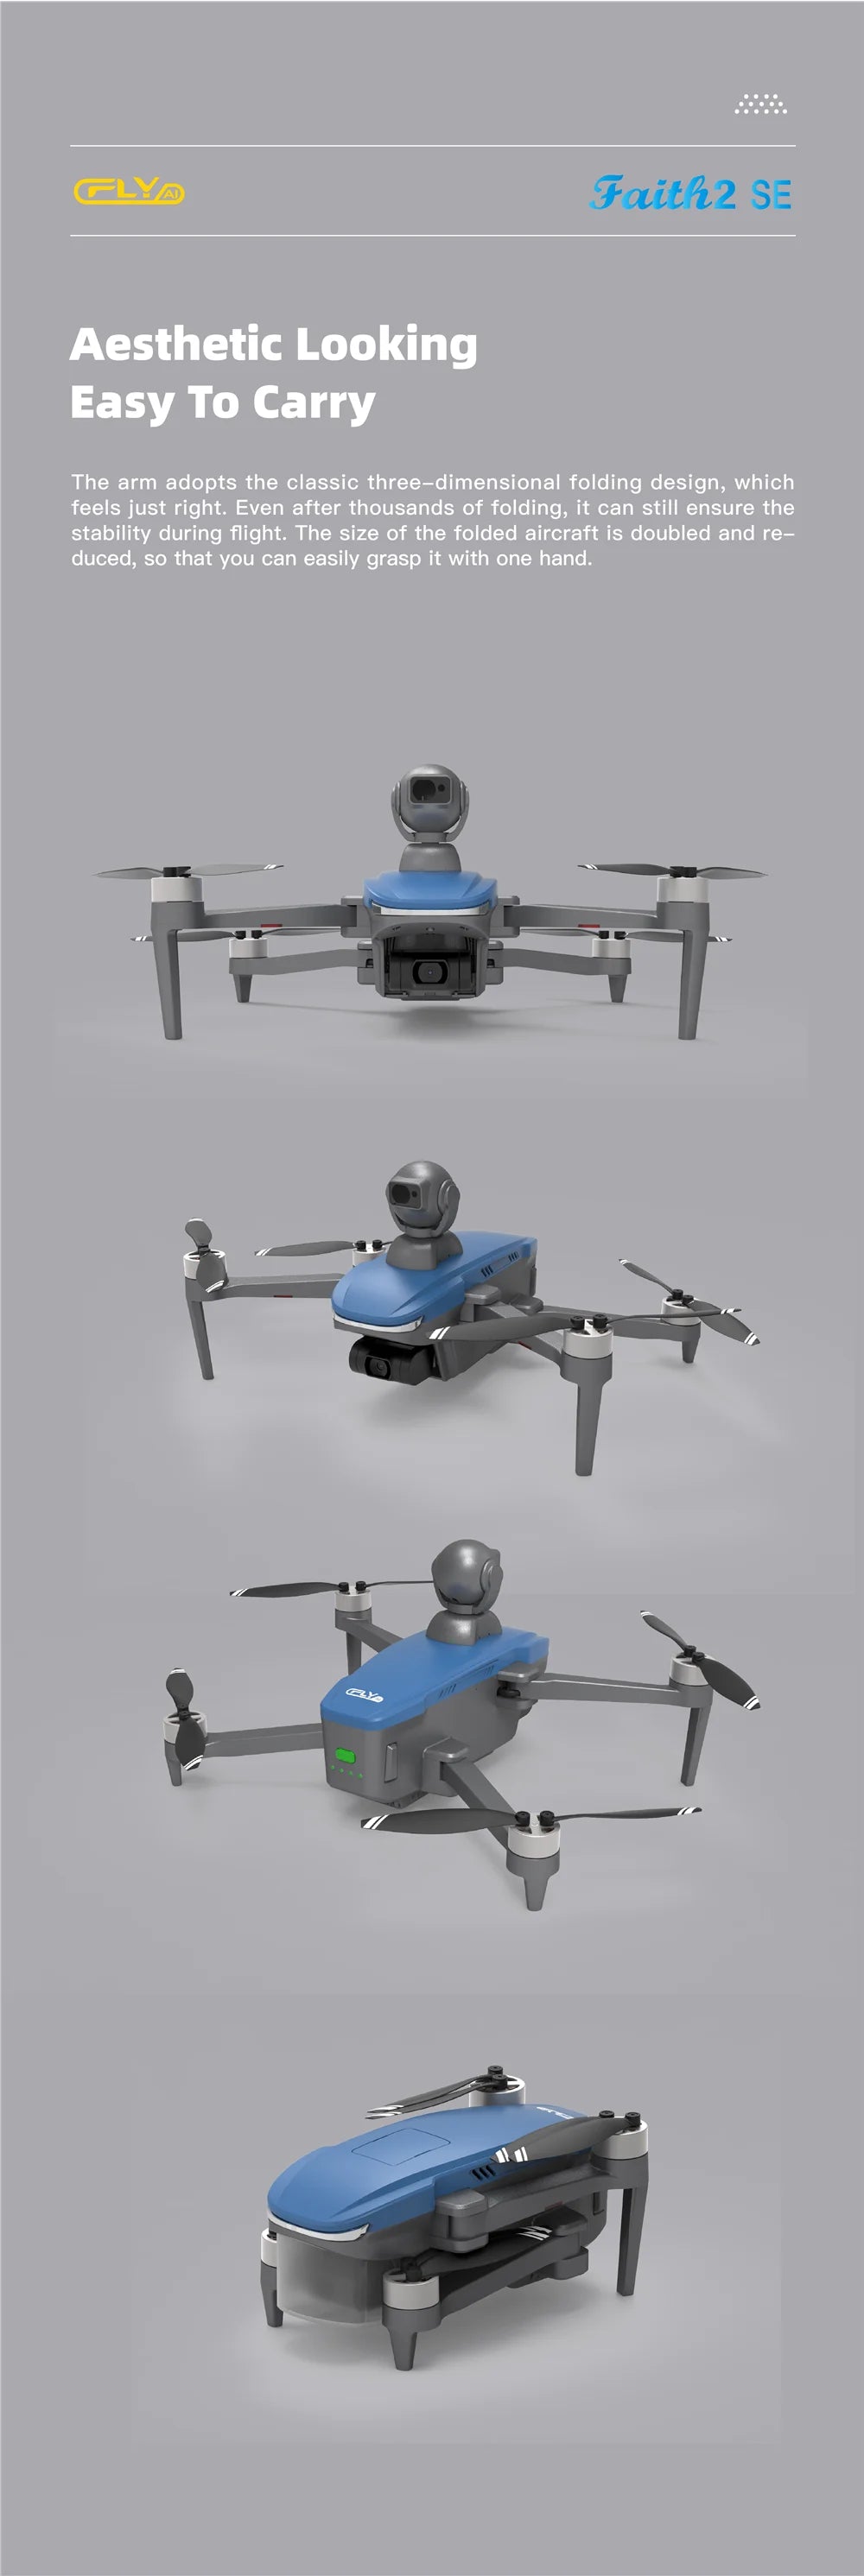 CFLY Faith2 SE Drone, the folding arm adopts the classic three-dimensional folding design, which feels just right .